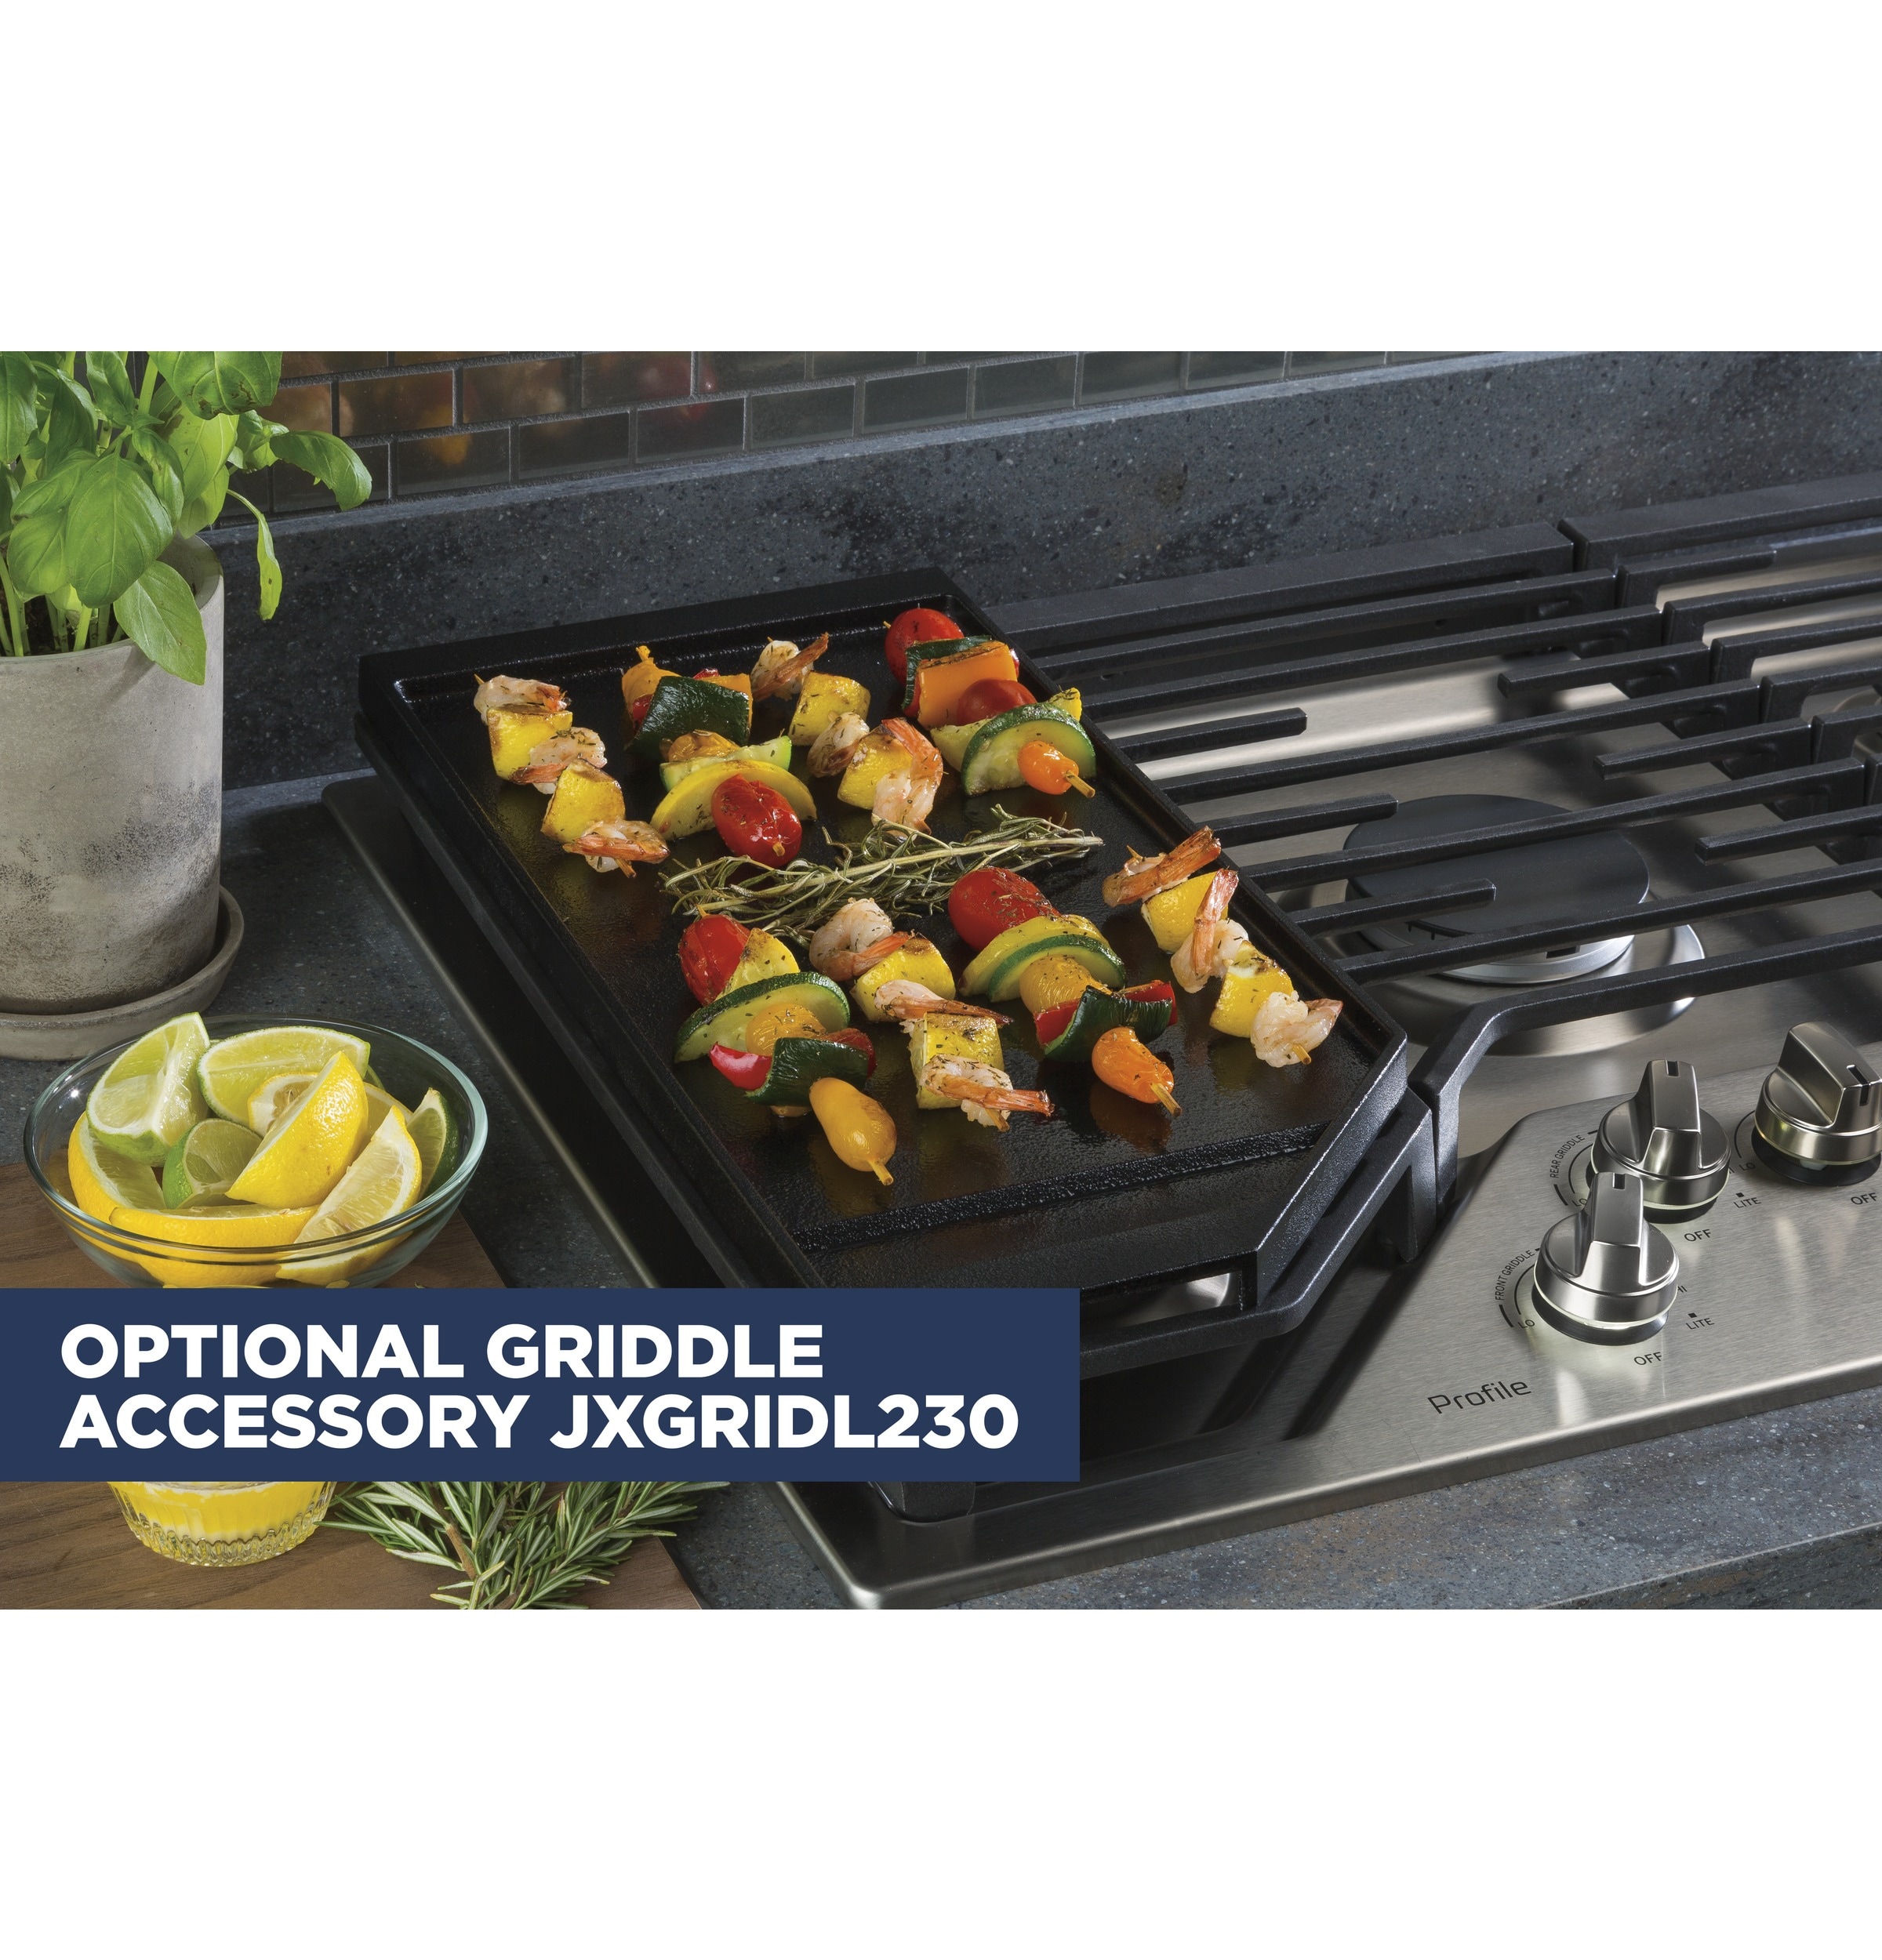 Thor Kitchen Cast Iron Reversible Griddle/Grill (RG1022)